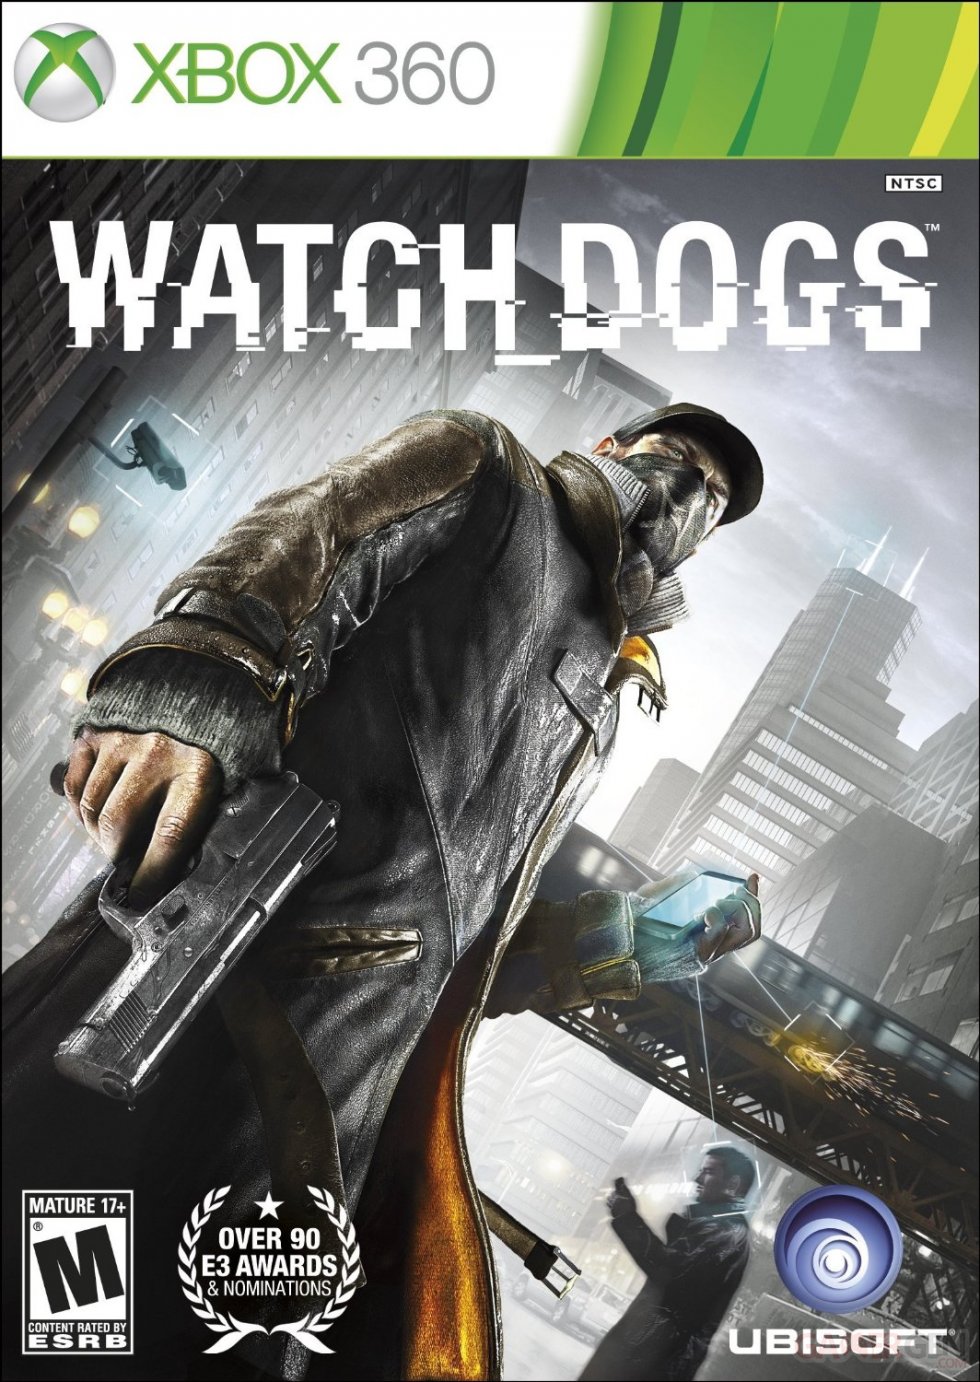 watch-dogs-cover-jaquette-boxart-us-xbox360